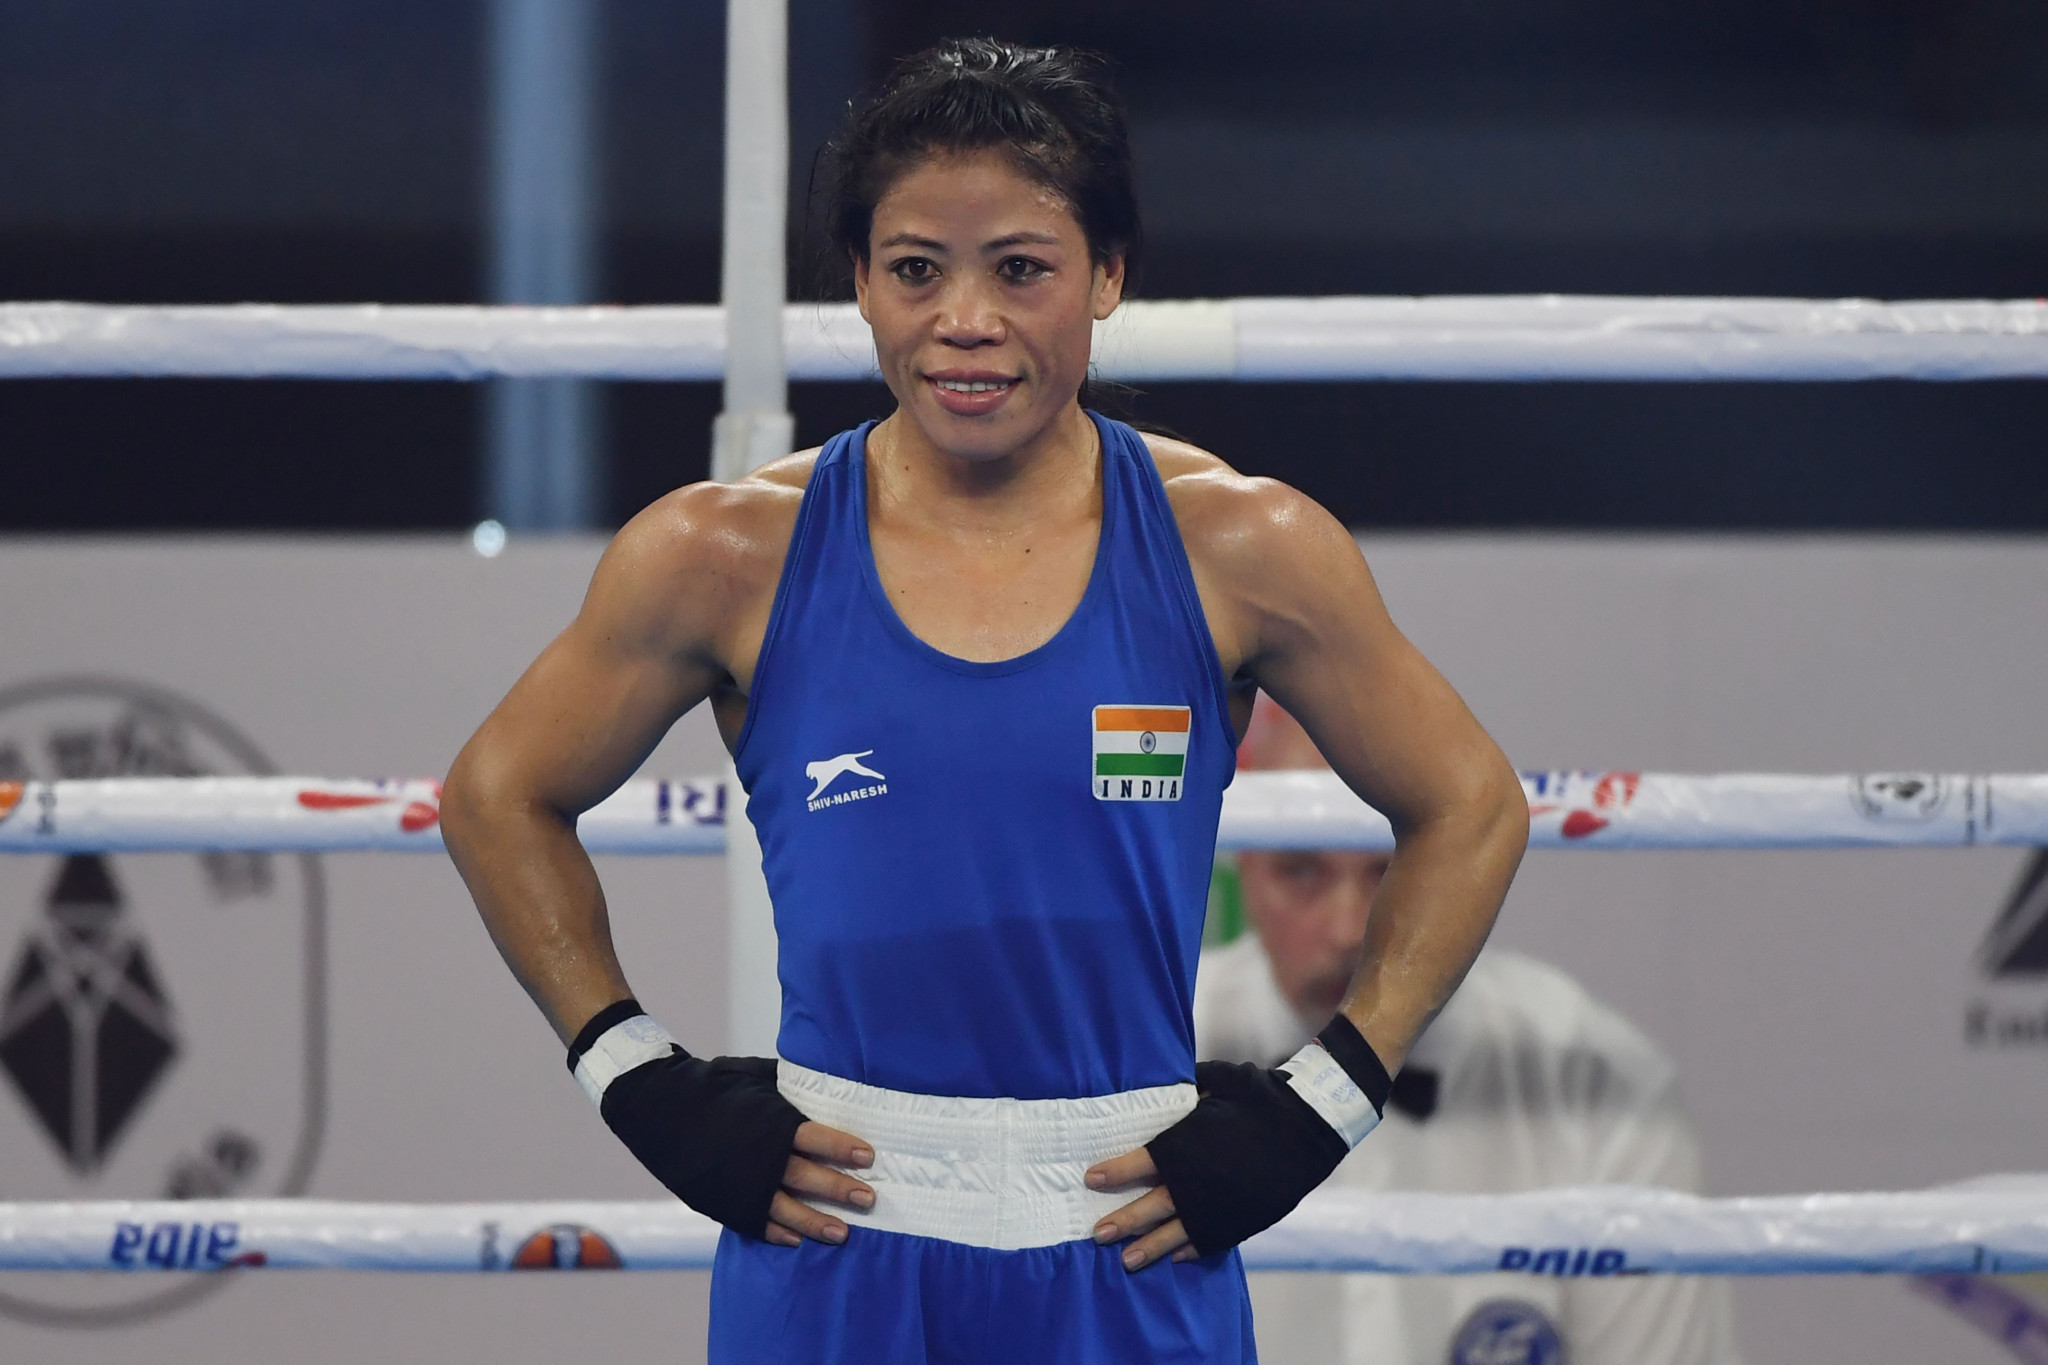 Vinesh Phogat claims that the Mary Kom, pictured, and Anurag Thakur have ignored her complaints over the Oversight Committee's handling of the case ©Getty Images